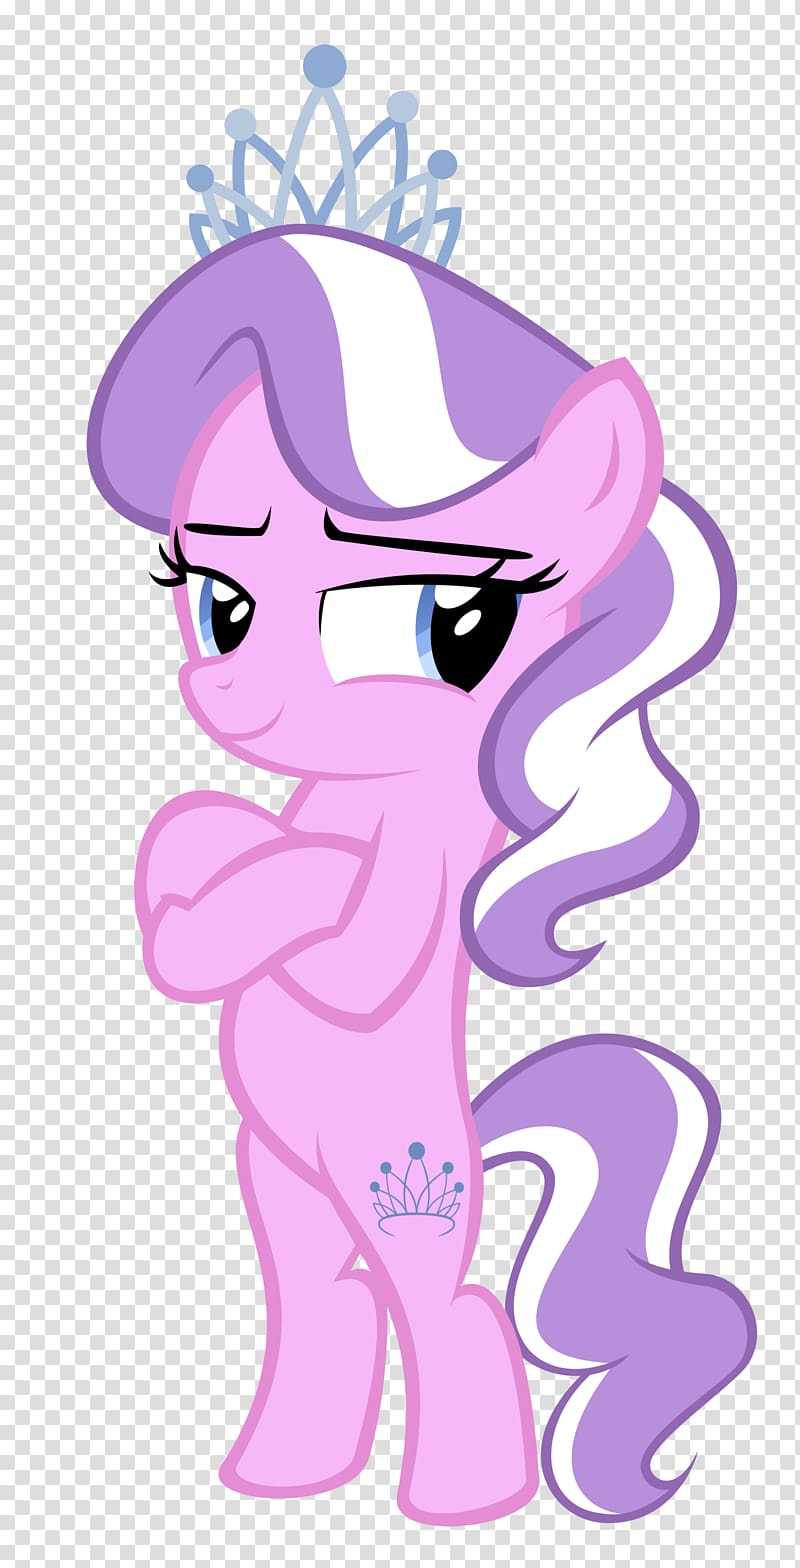 Pony Pinkie Pie Cartoon Fan art, what are you thinking about when you\'re standing? transparent background PNG clipart